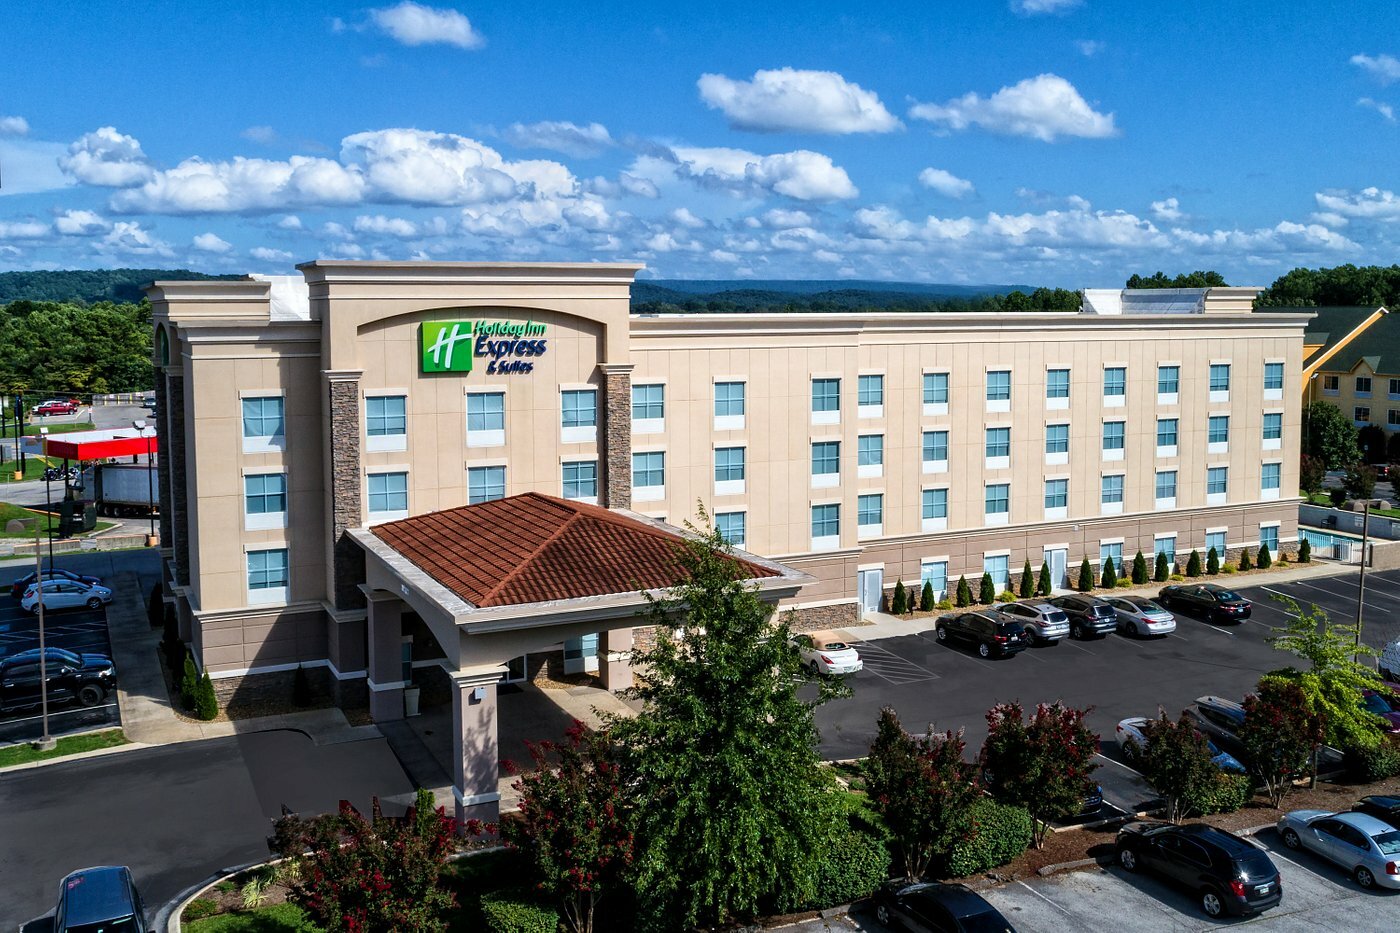 Photo of Holiday Inn Express & Suites Cookeville, Cookeville, TN